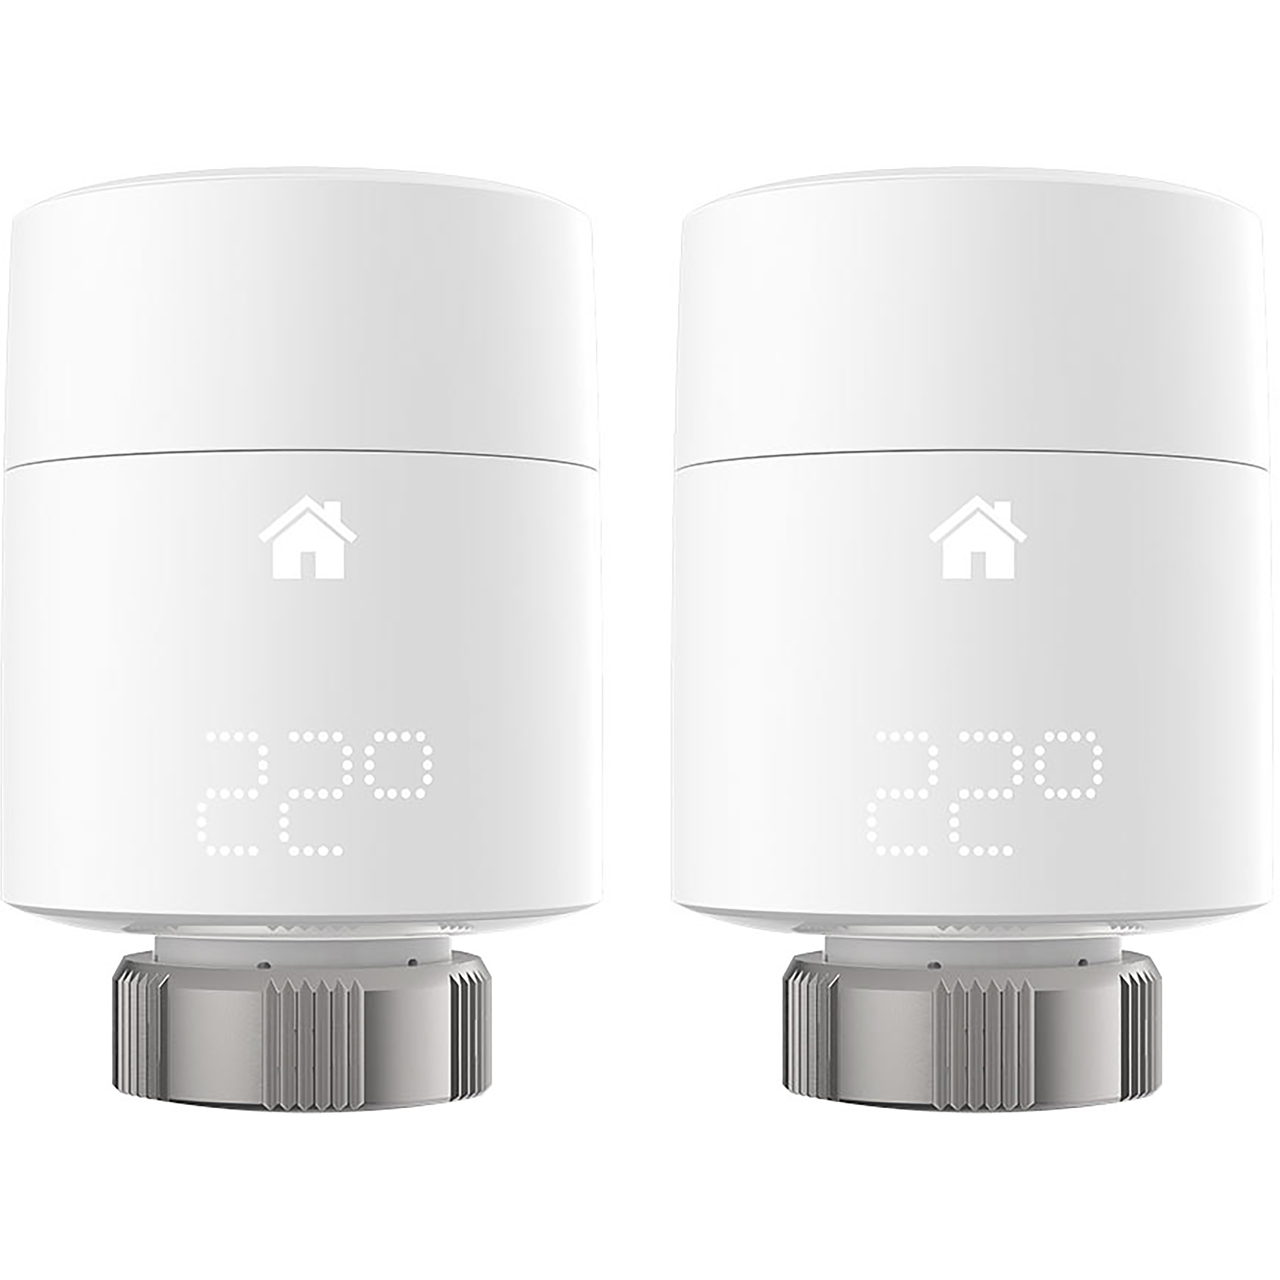 tado Smart Radiator Thermostat Vertical Duo Pack Review